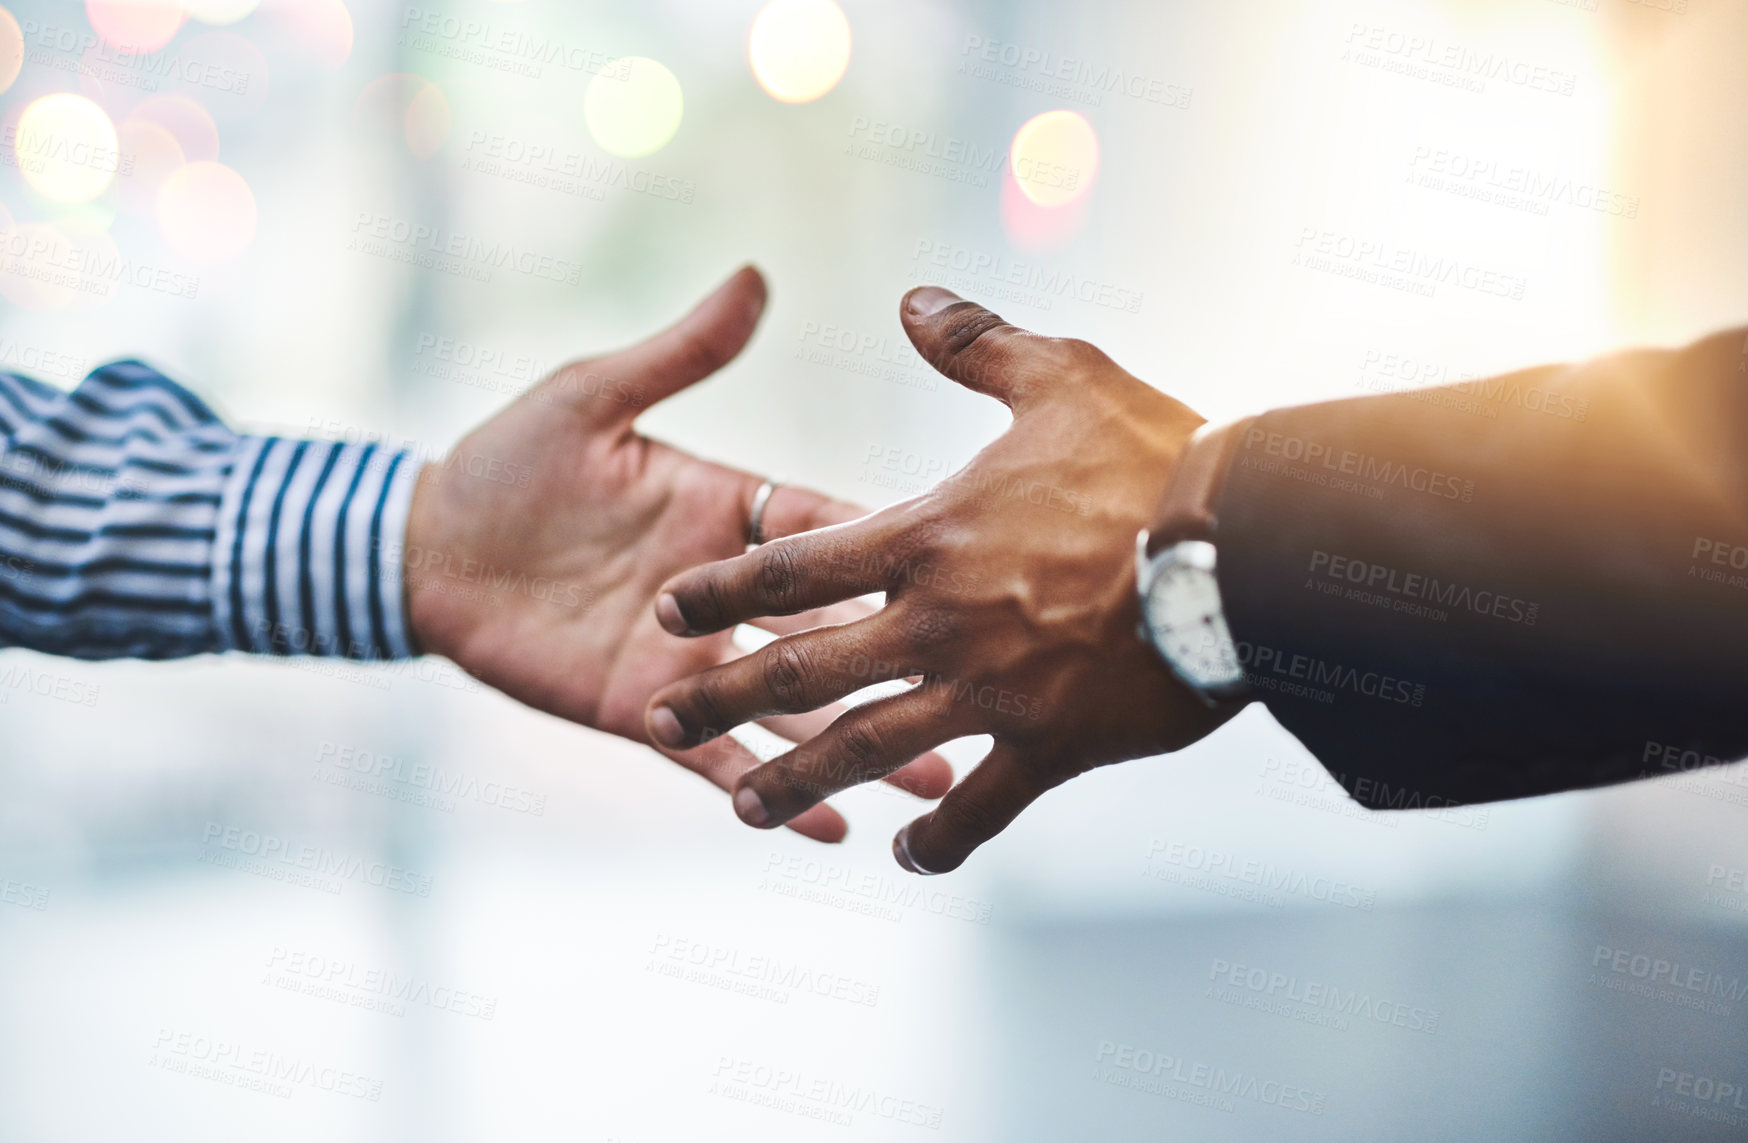 Buy stock photo Closeup shot of two unrecognizable businesspeople shaking hands in an office